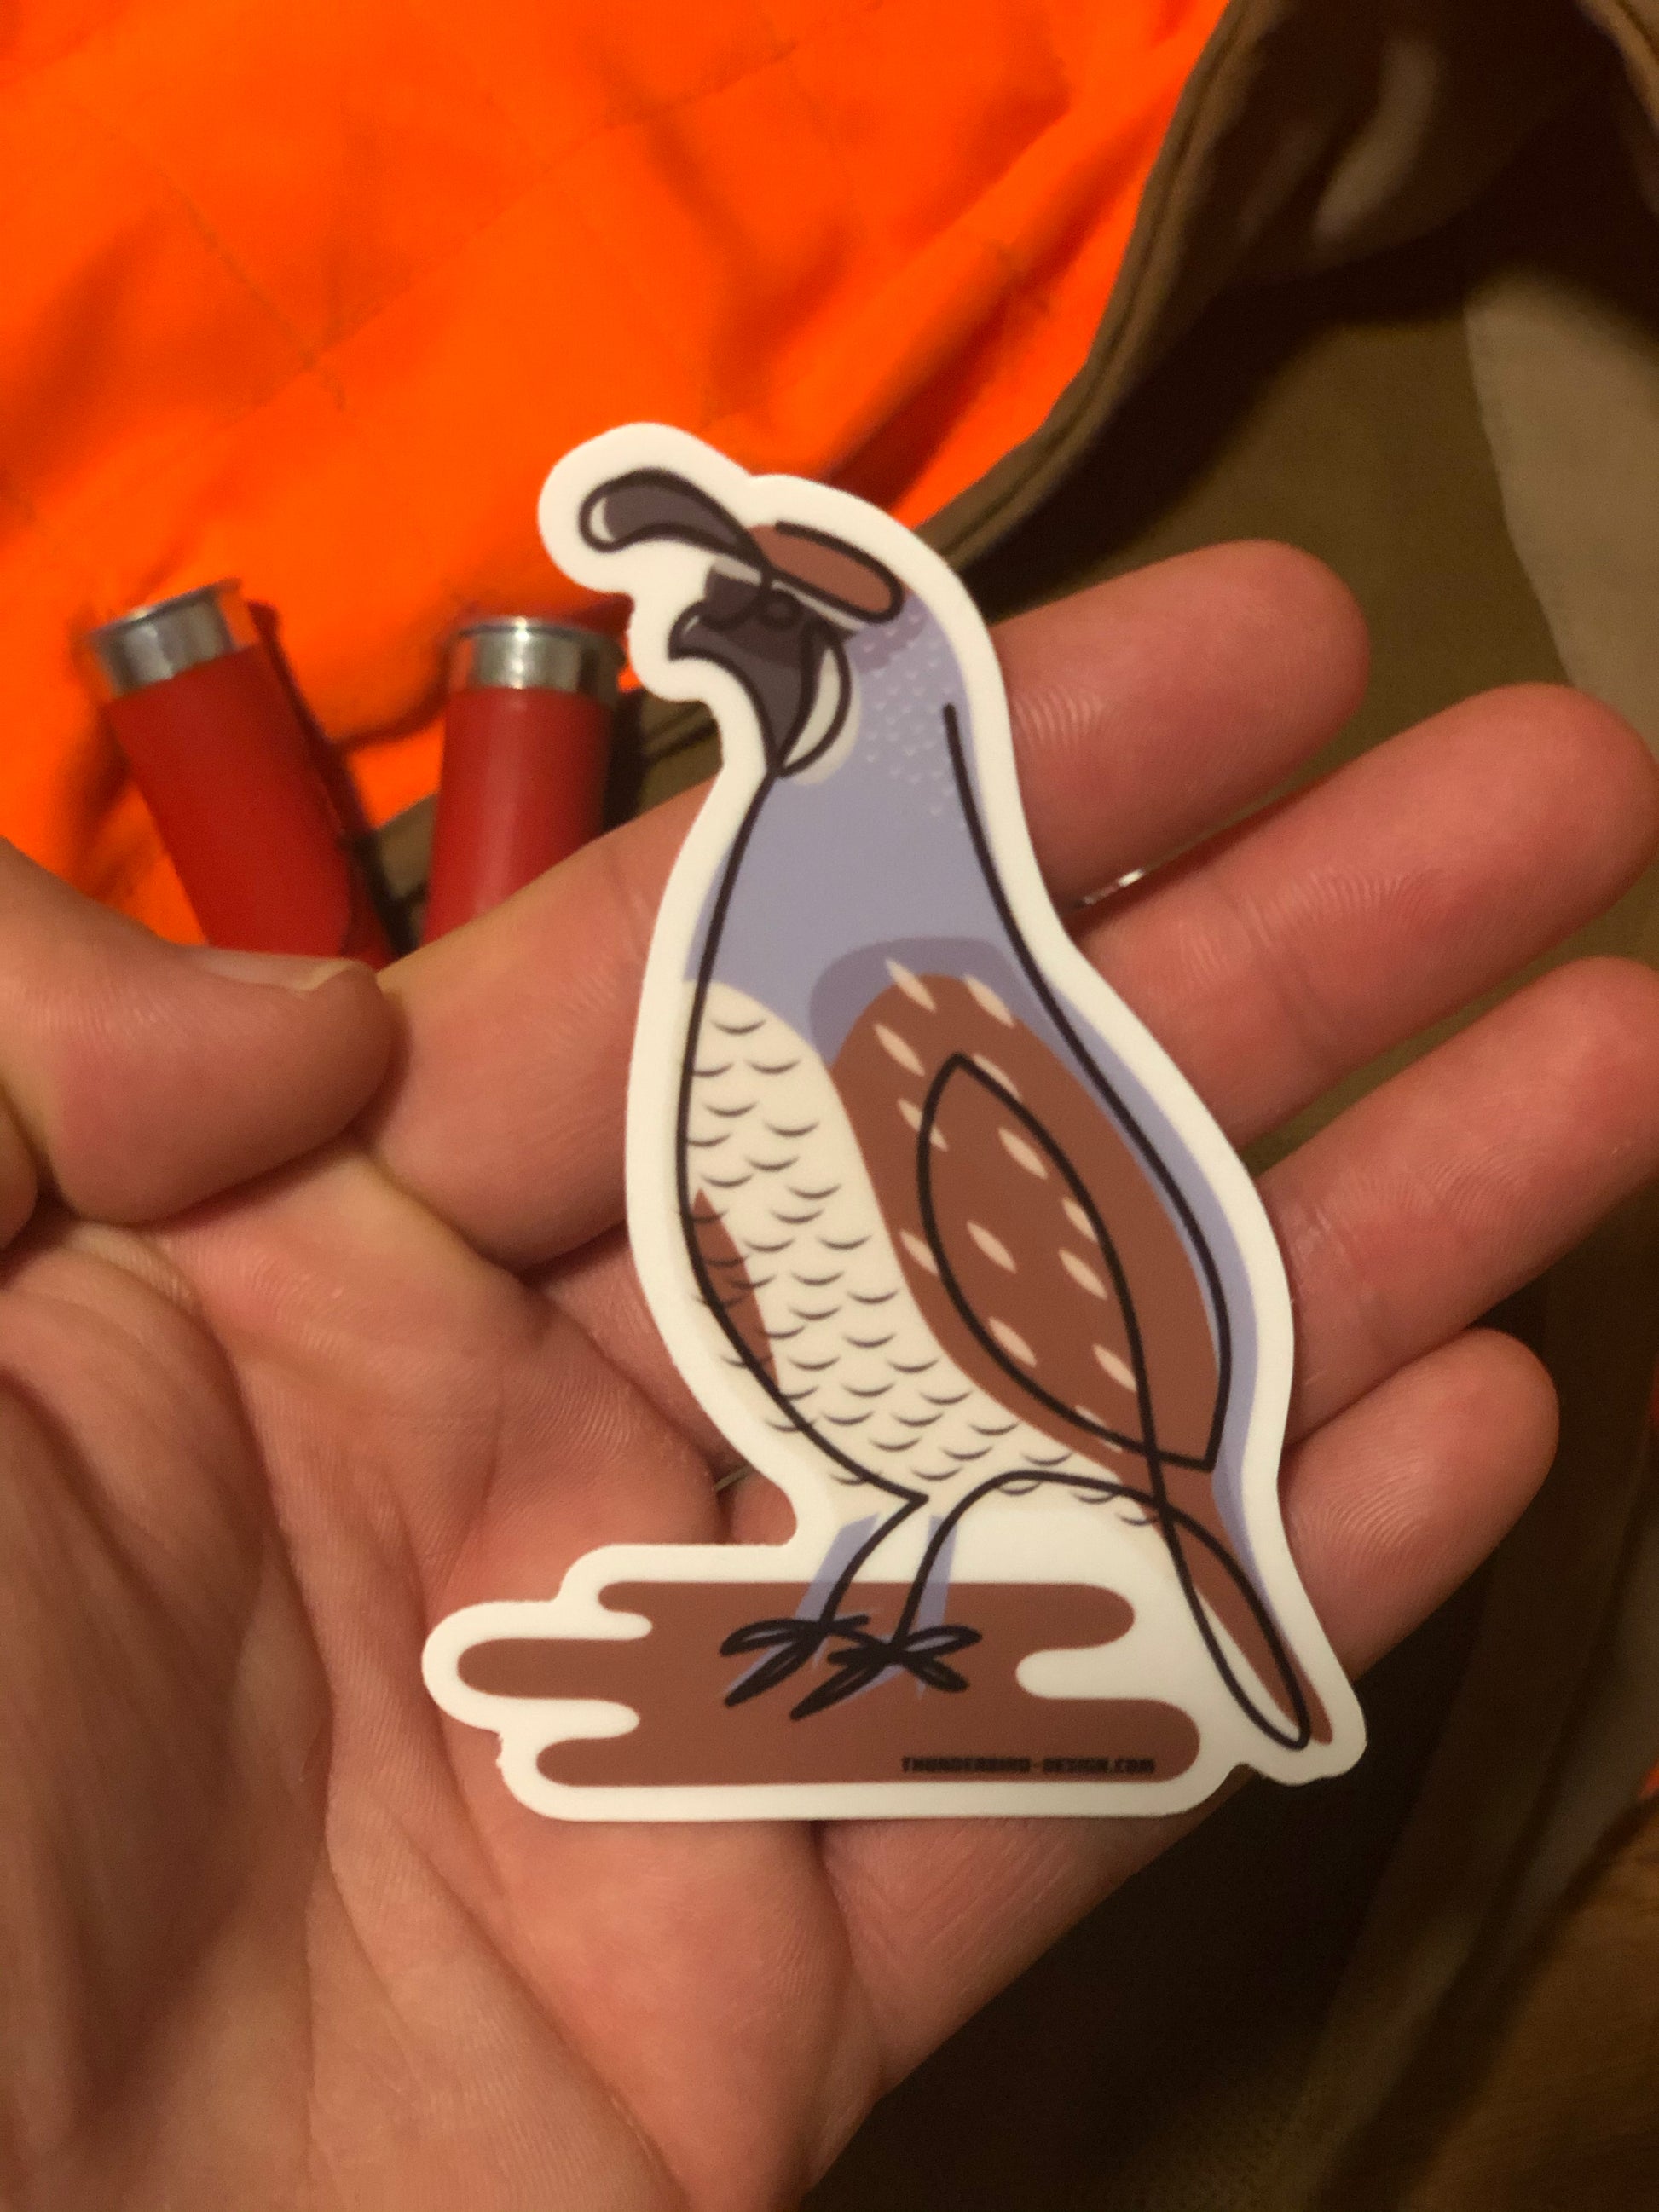 Thunderbird Outdoor SupplyValley Quail Upland Bird - Single Line Series Decal w/ Matte FinishValley Quail Upland Bird - Single Line Series Decal
4" Single Line Illustration of a California Valley Quail. Matte Weatherproof Vinyl Decal.Place one on your case, cooler, dog crate, bumper, water-bottle, or anythin